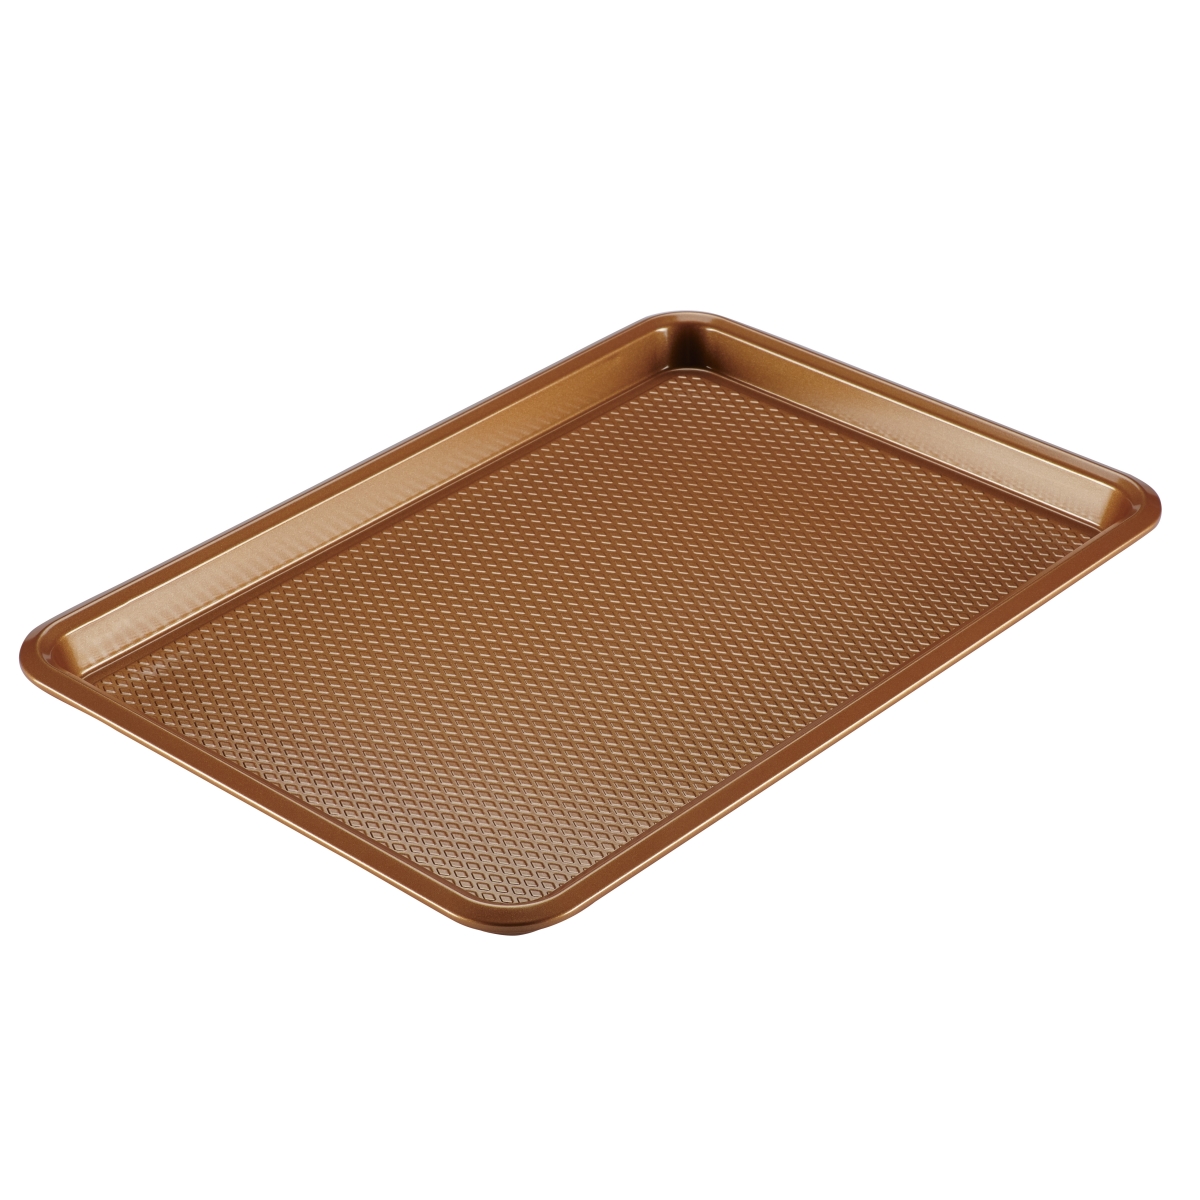 Picture of Ayesha Curry 46999 Nonstick Cookie Pan, 11 x 17 in. - Copper